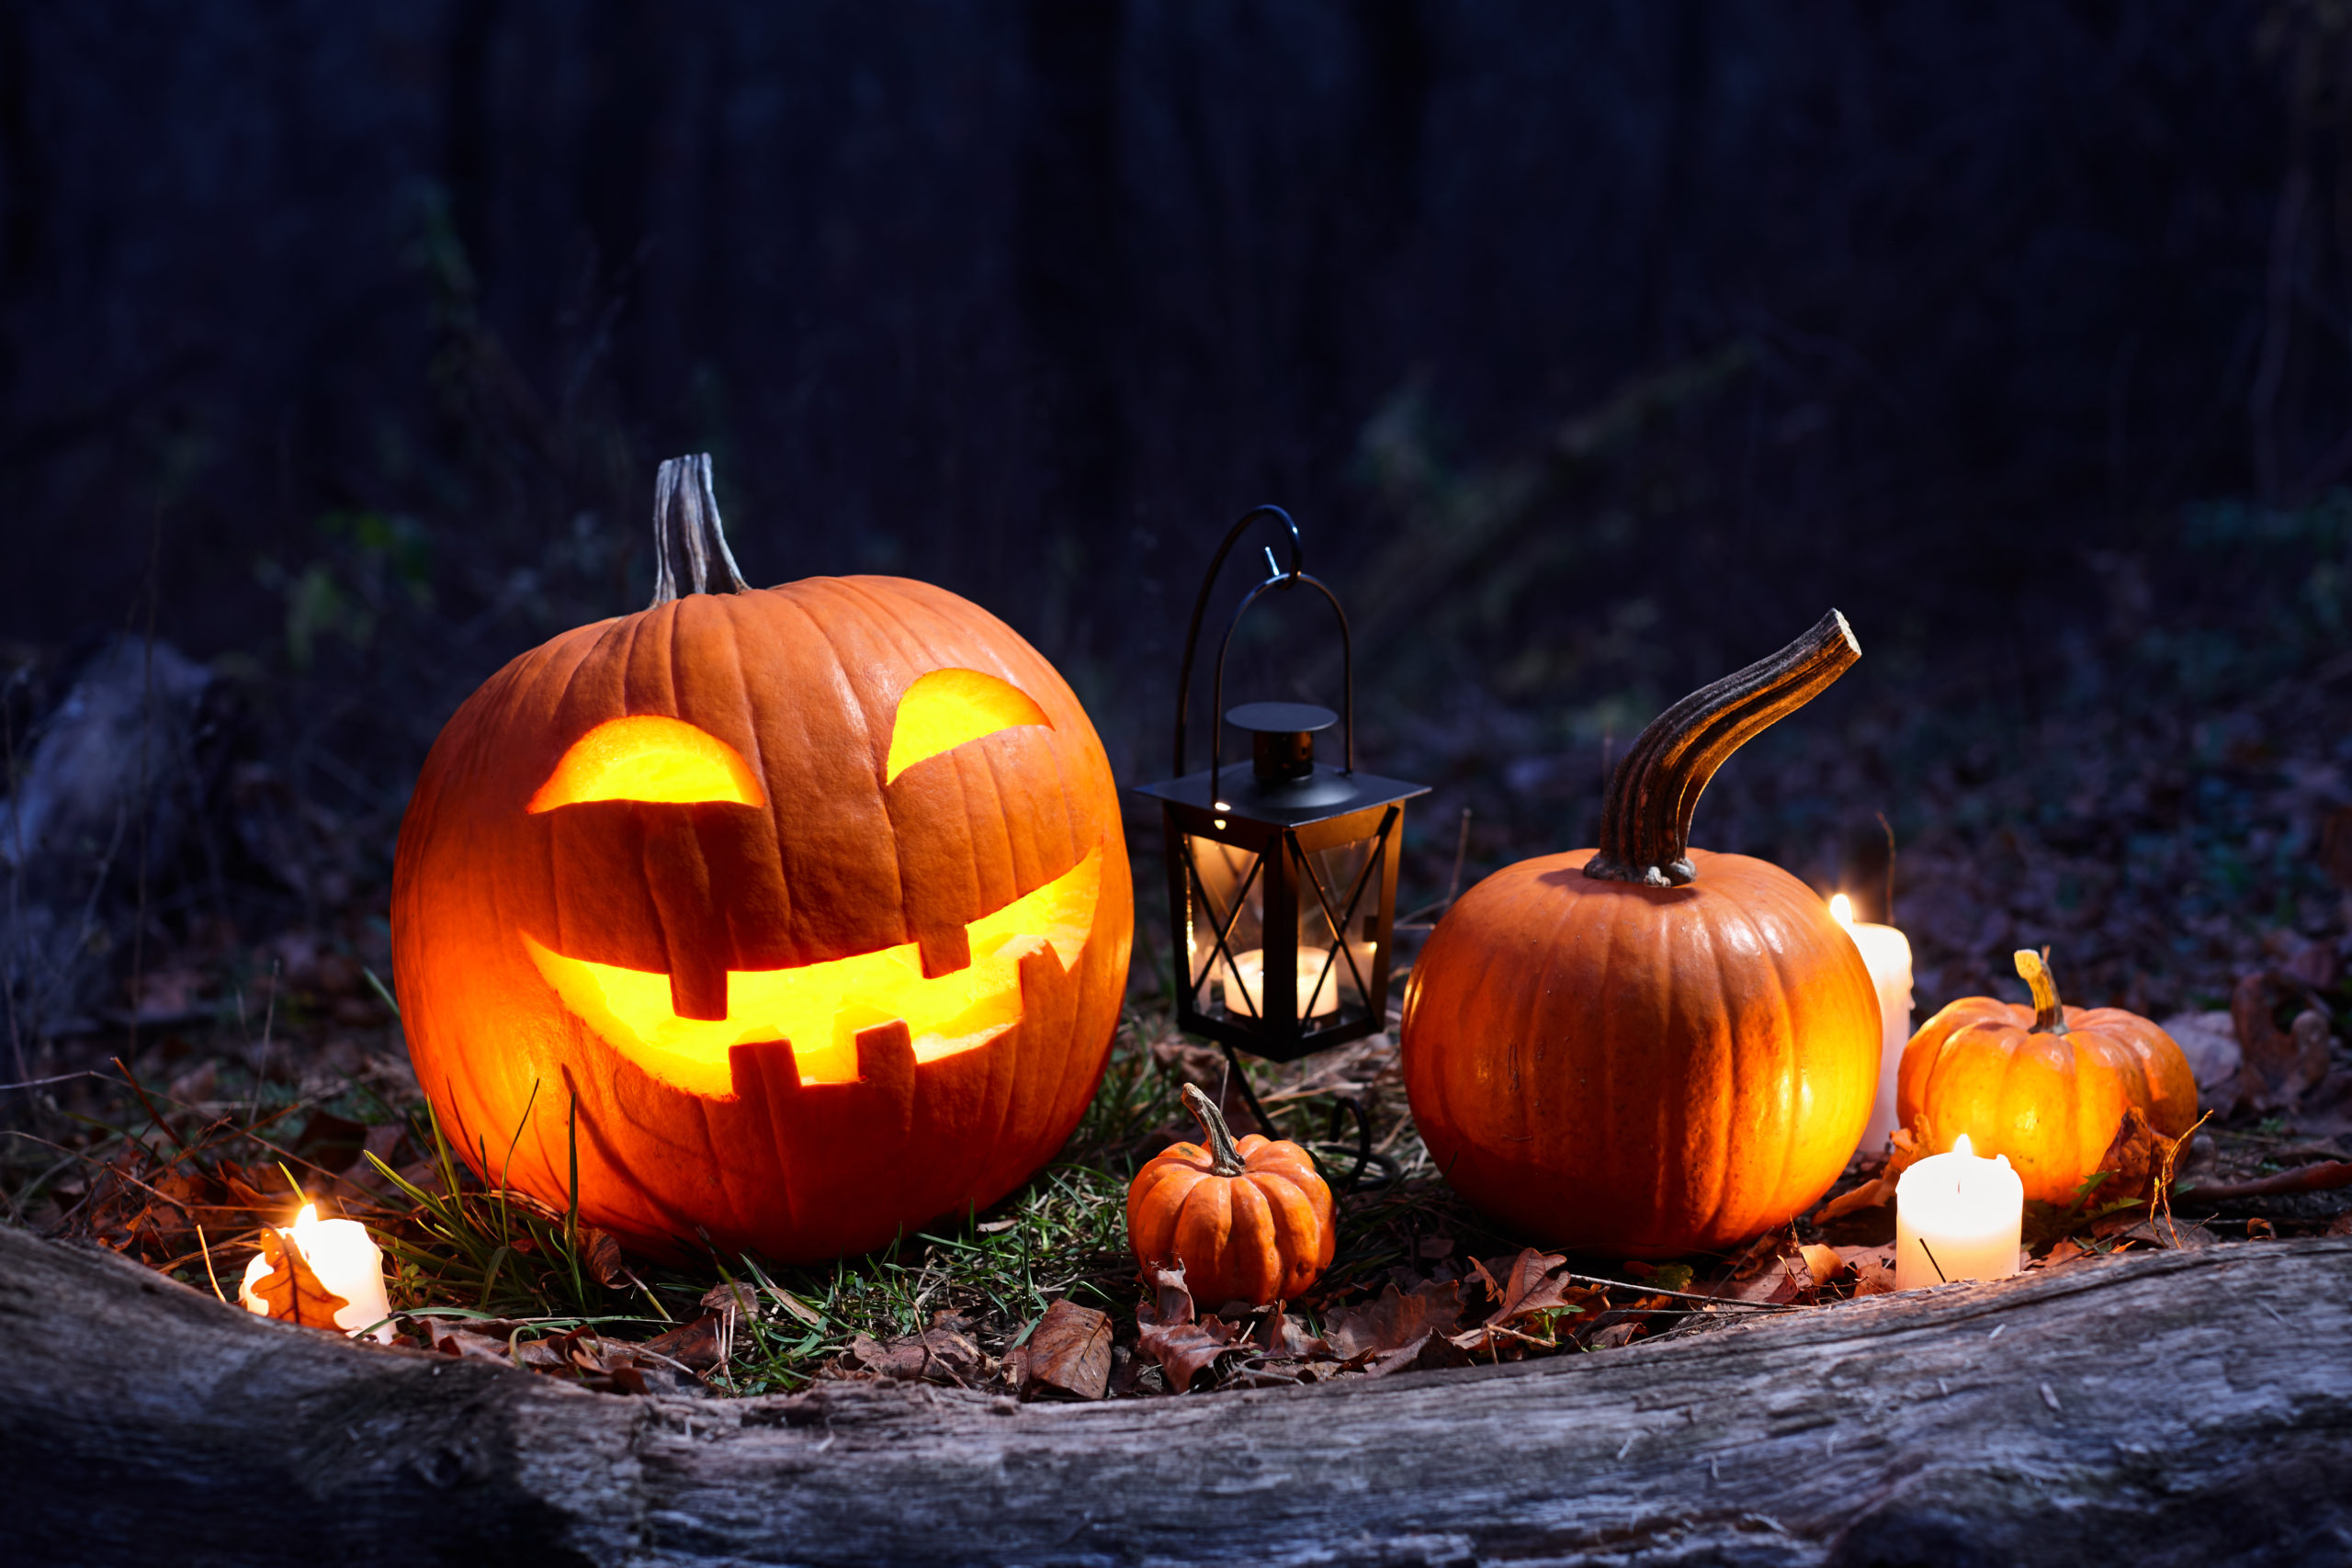 A lit Jack-o'-lantern is on forest-like terrain to the left of three plain pumpkins and a lit lantern and surrounded by candles.